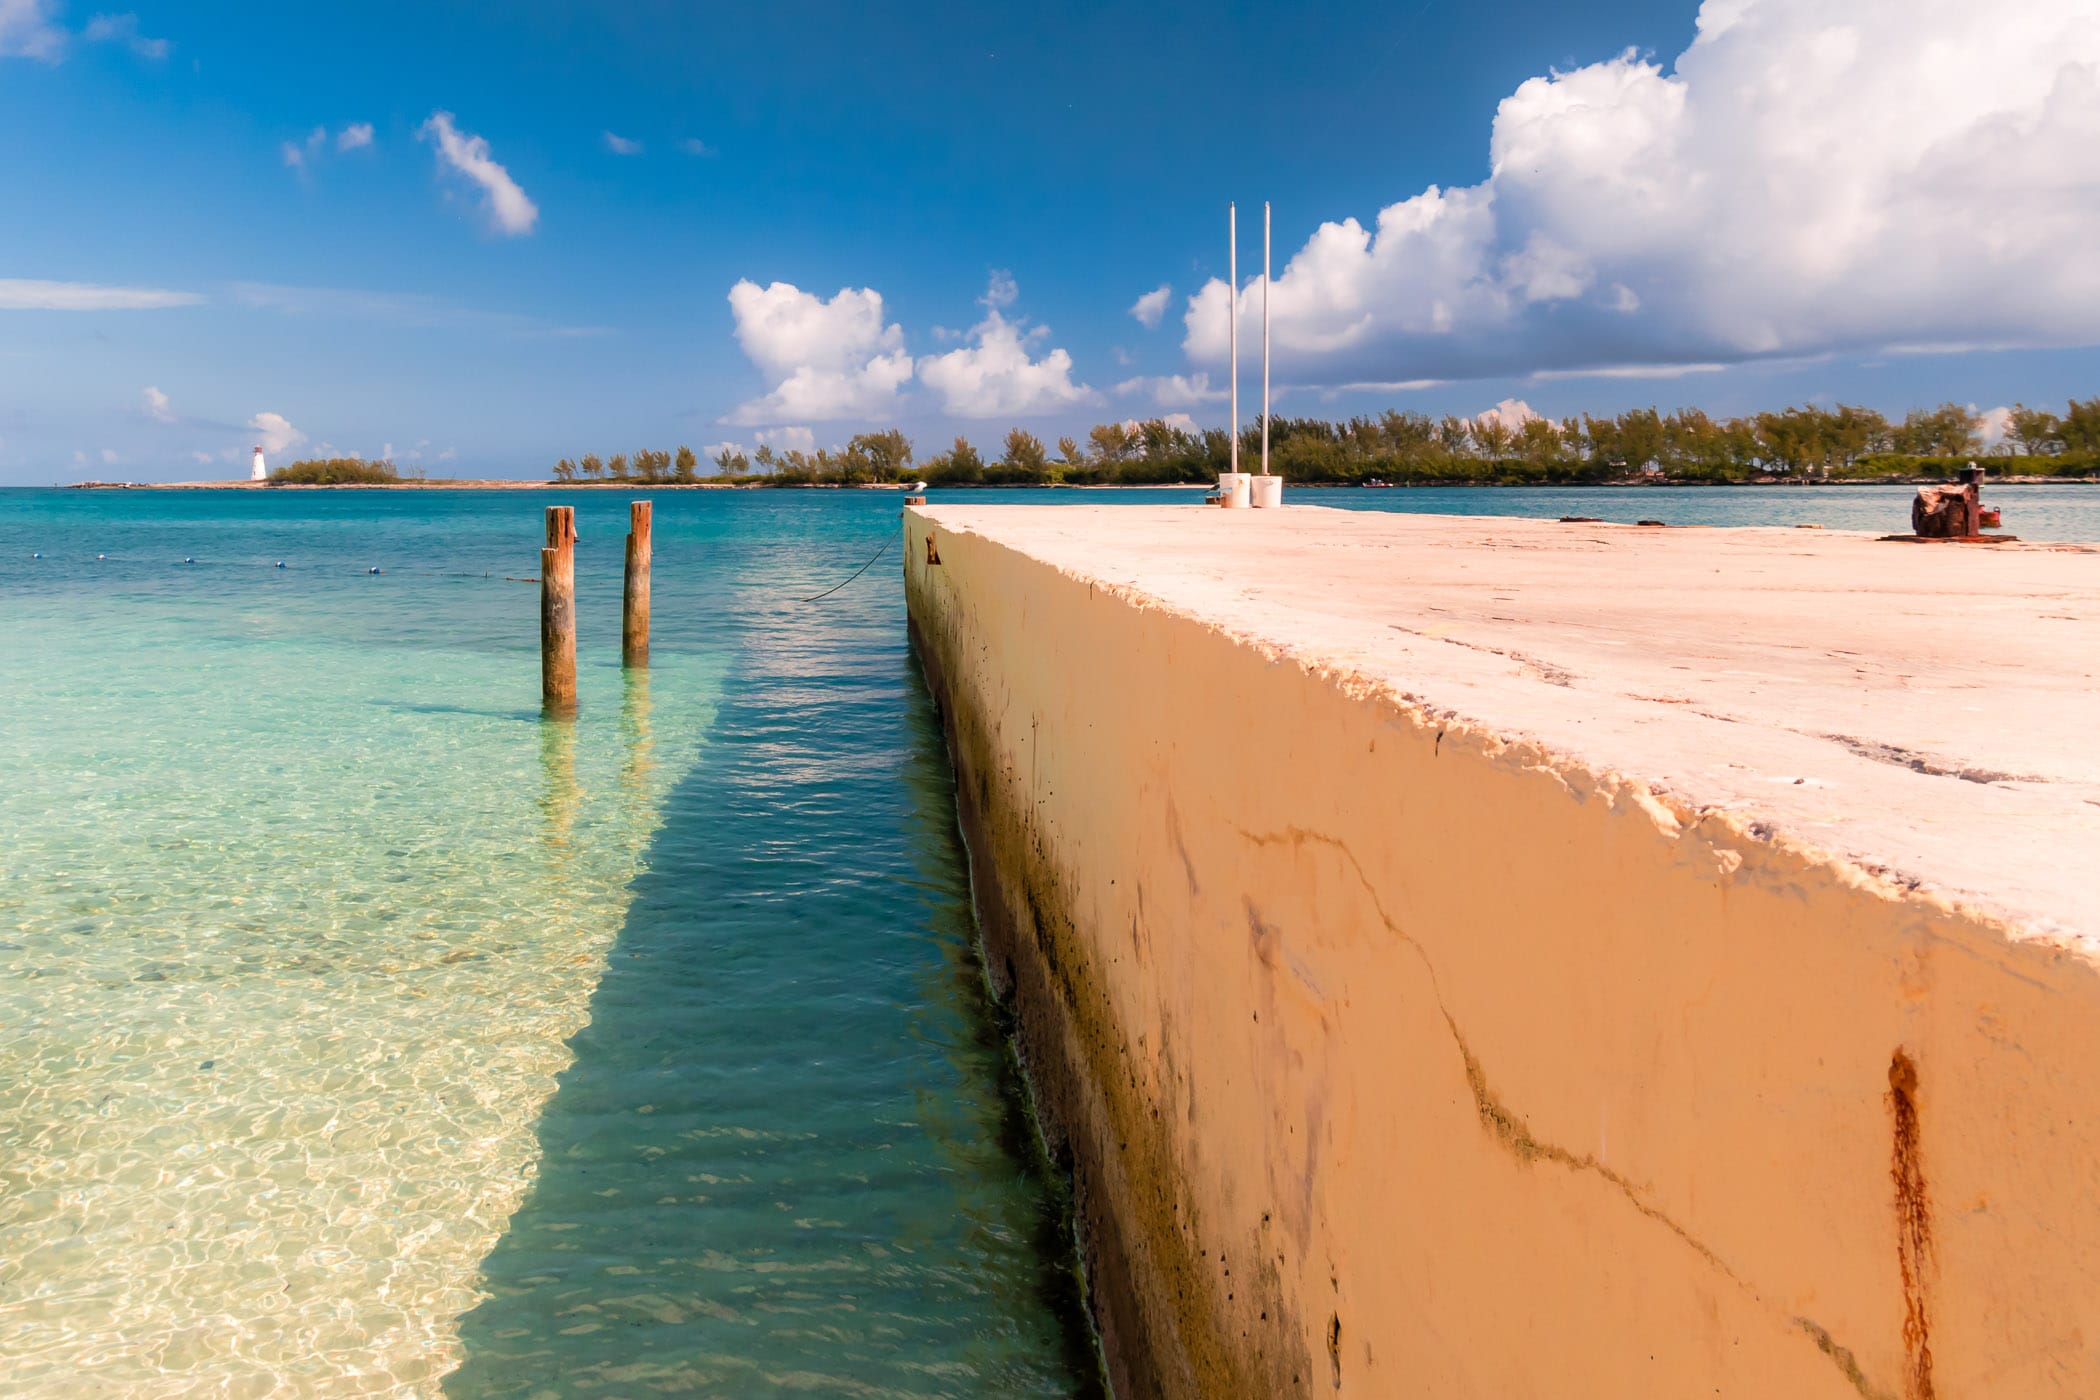 A barrier extends from the beach into the harbour at Nassau, Bahamas.